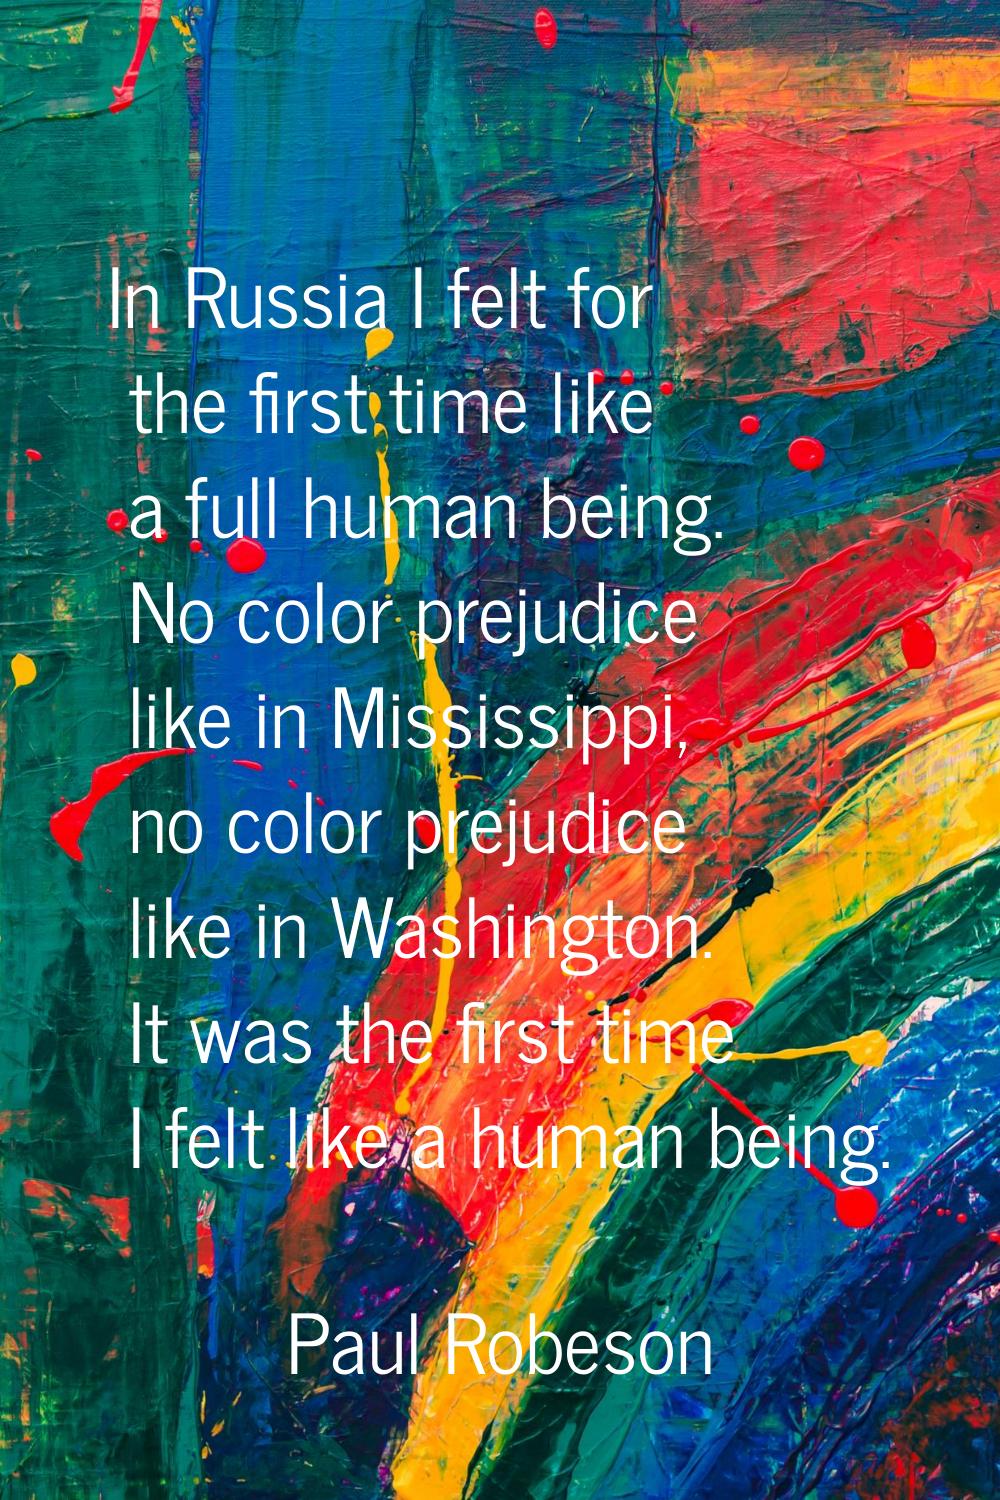 In Russia I felt for the first time like a full human being. No color prejudice like in Mississippi